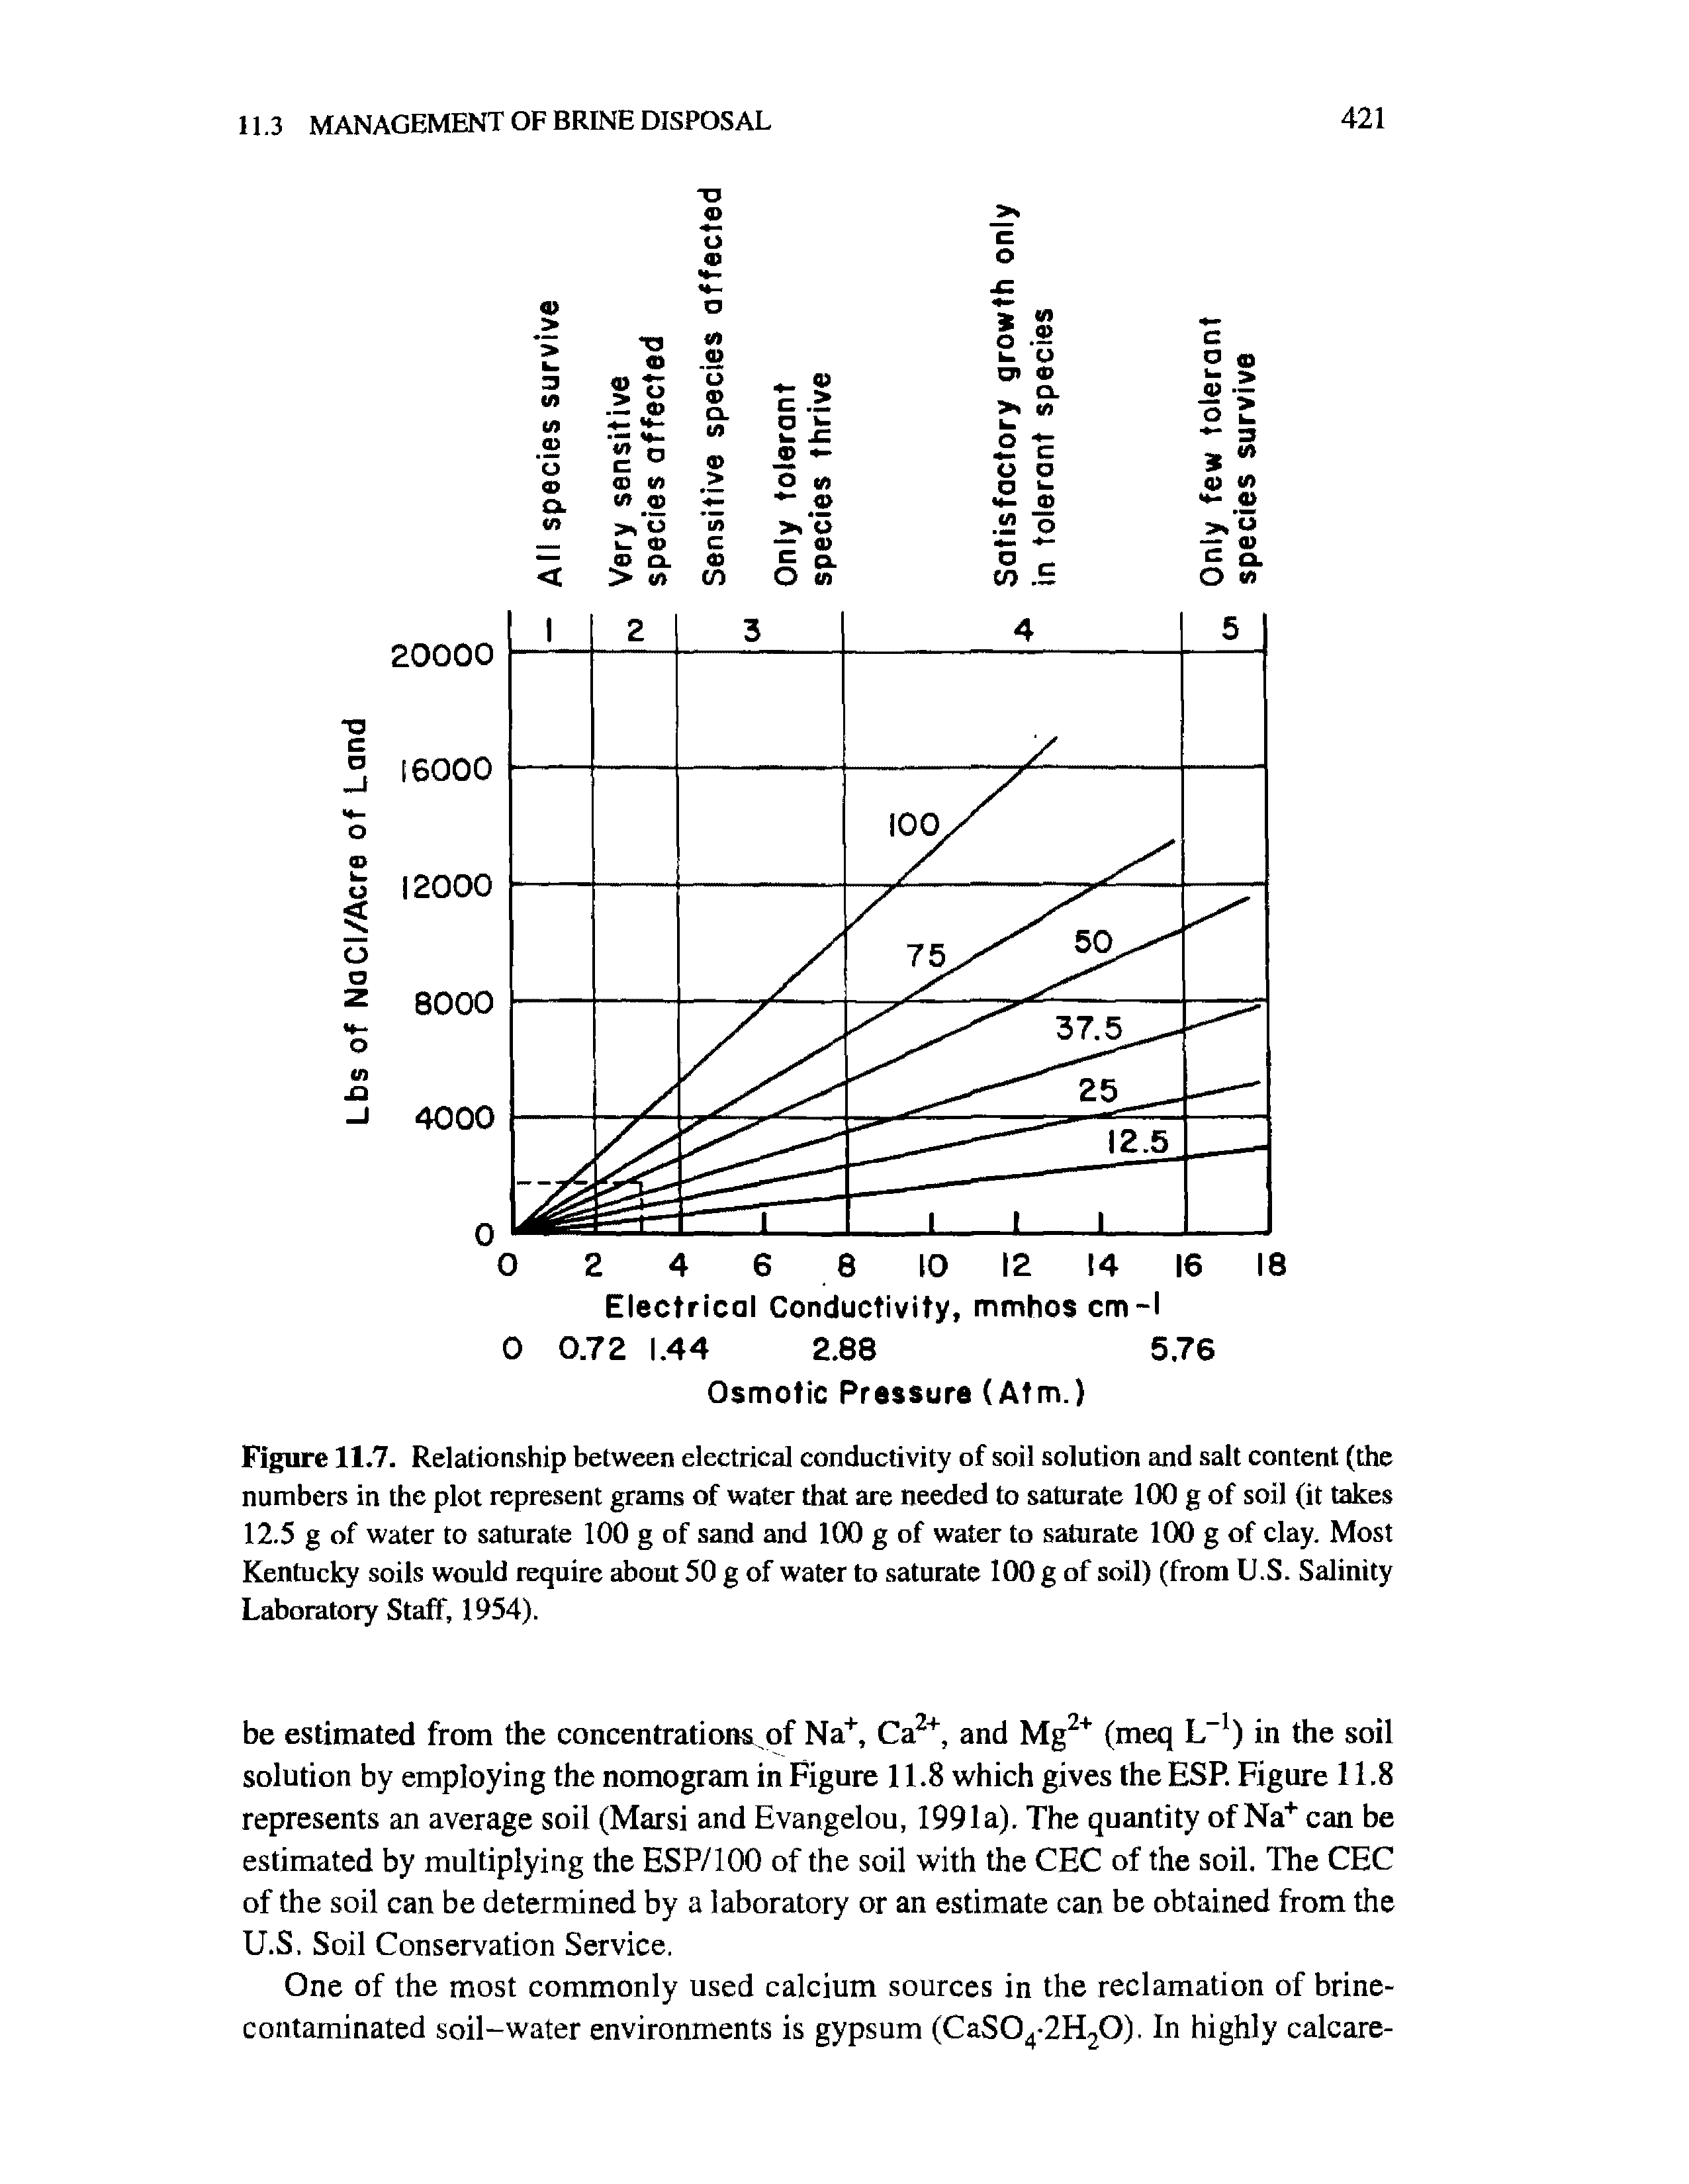 Figure 11.7. Relationship between electrical conductivity of soil solution and salt content (the numbers in the plot represent grams of water that are needed to saturate 100 g of soil (it takes 12.5 g of water to saturate 100 g of sand and 100 g of water to saturate 100 g of clay. Most Kentucky soils would require about 50 g of water to saturate 100 g of soil) (from U.S. Salinity Laboratory Staff, 1954).